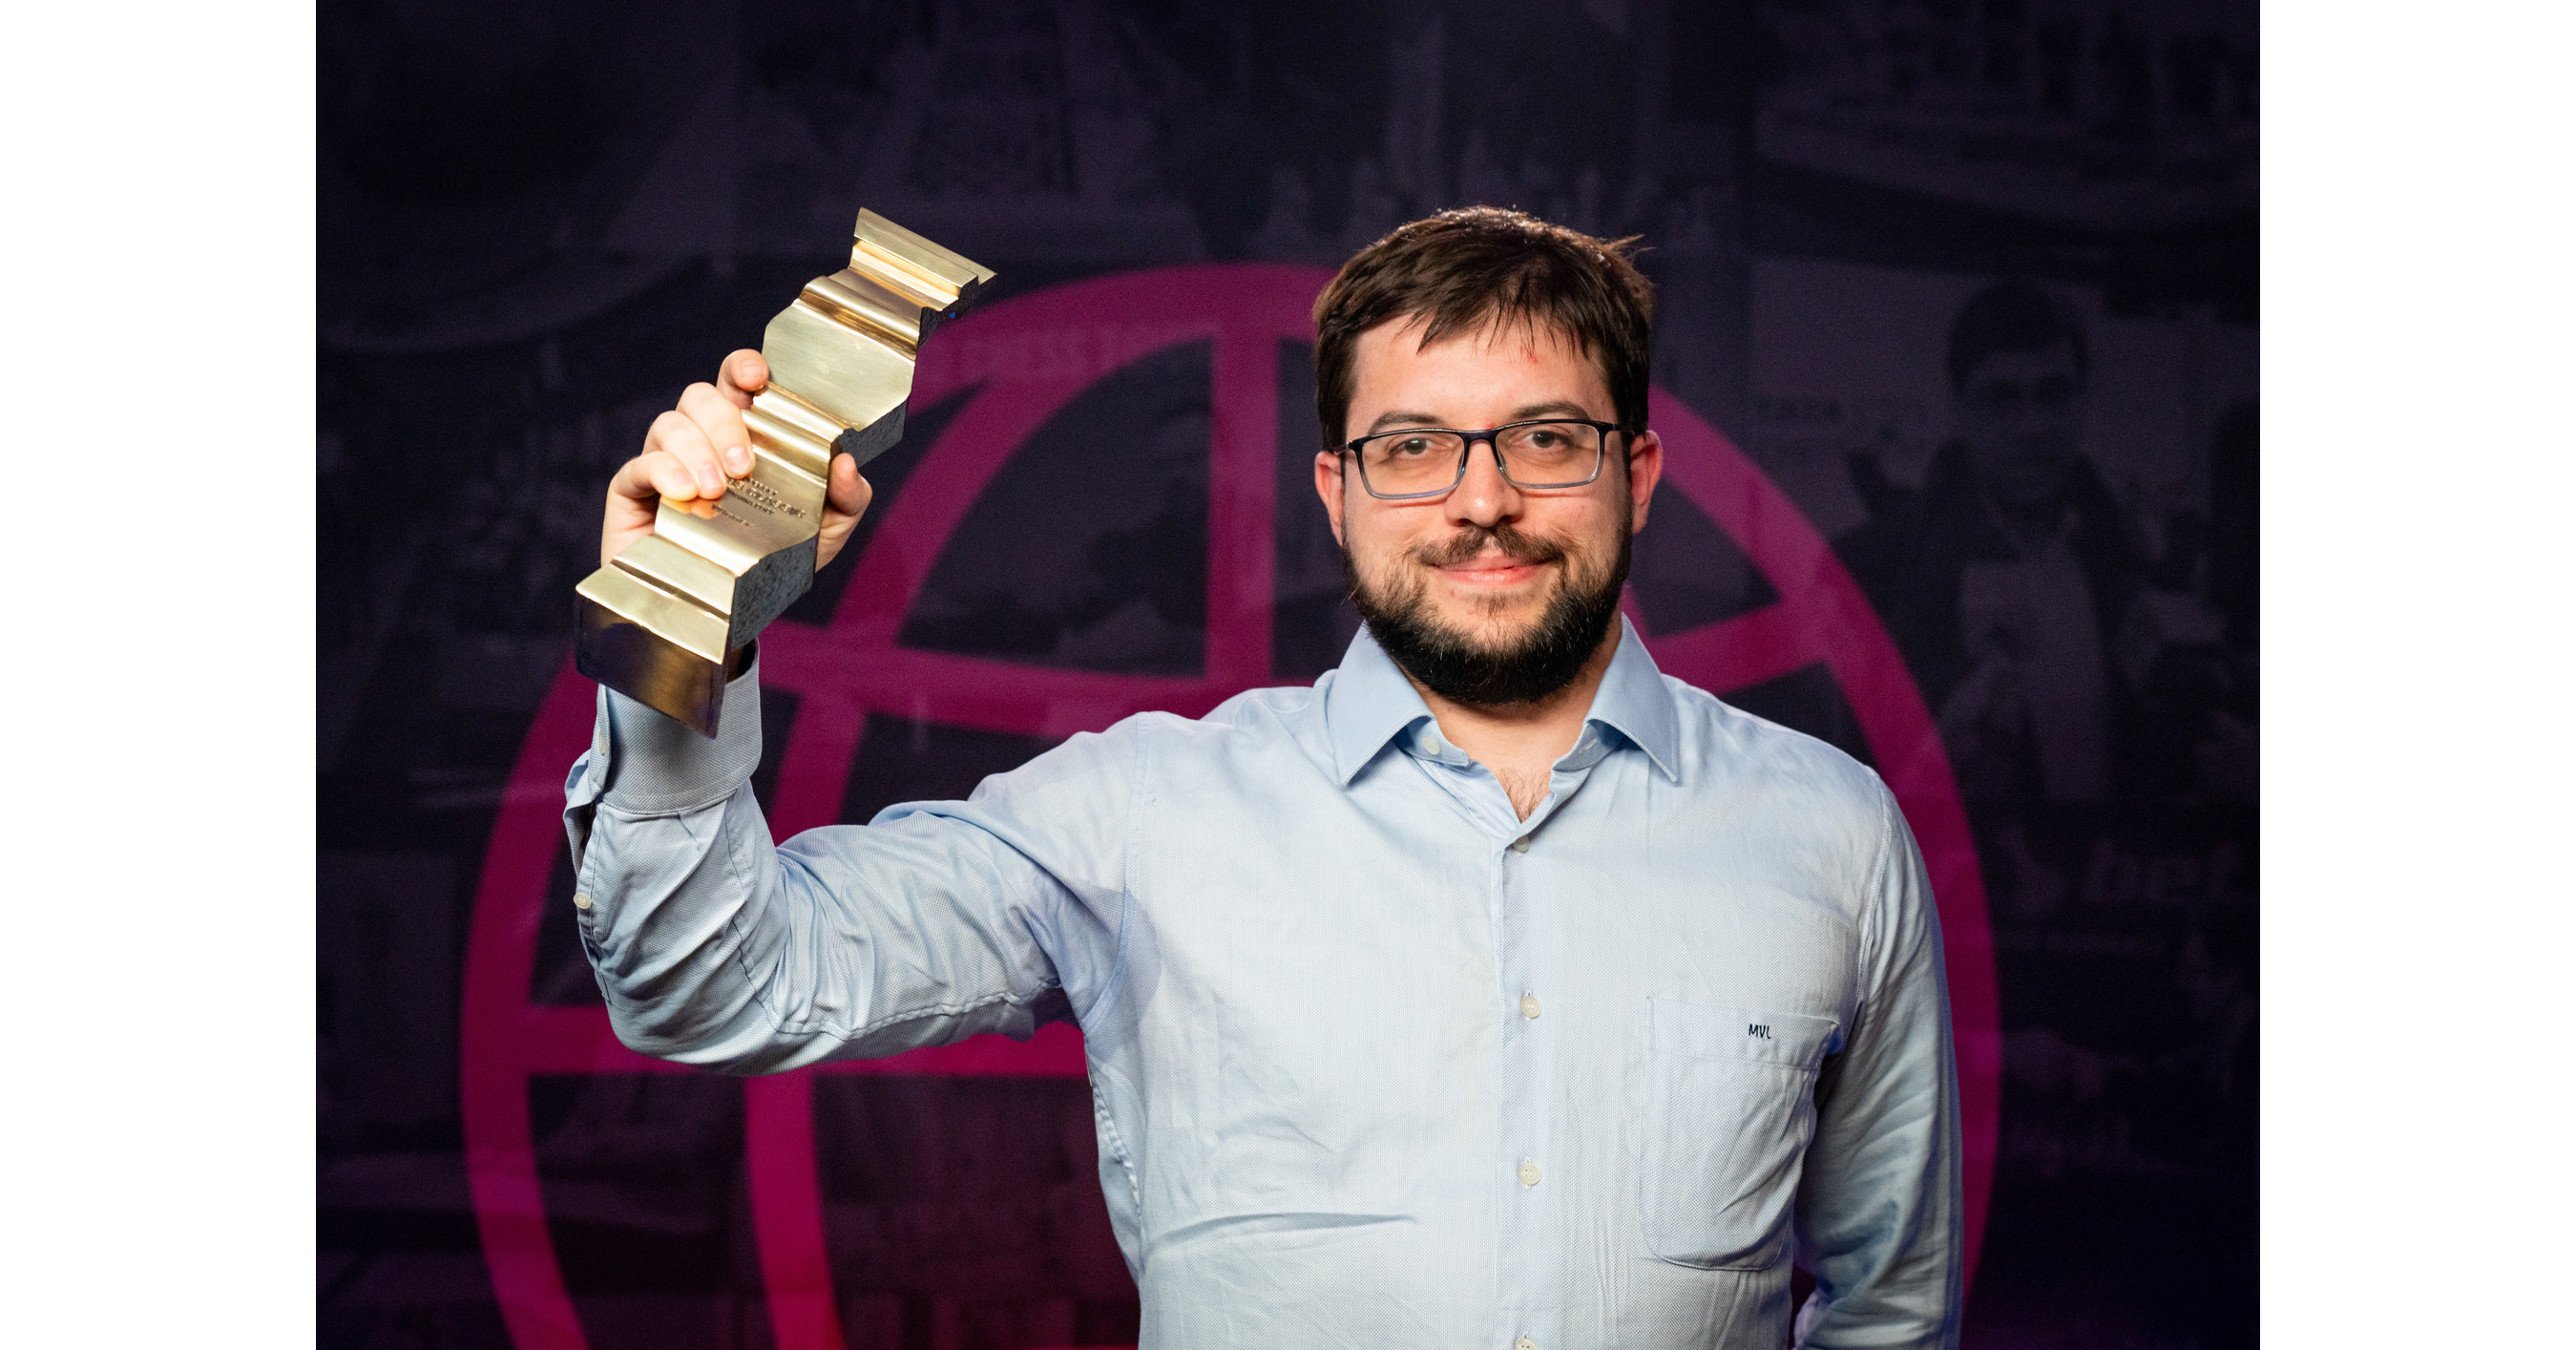 Looking ahead to 2023! - MVL - Maxime Vachier-Lagrave, Chess player